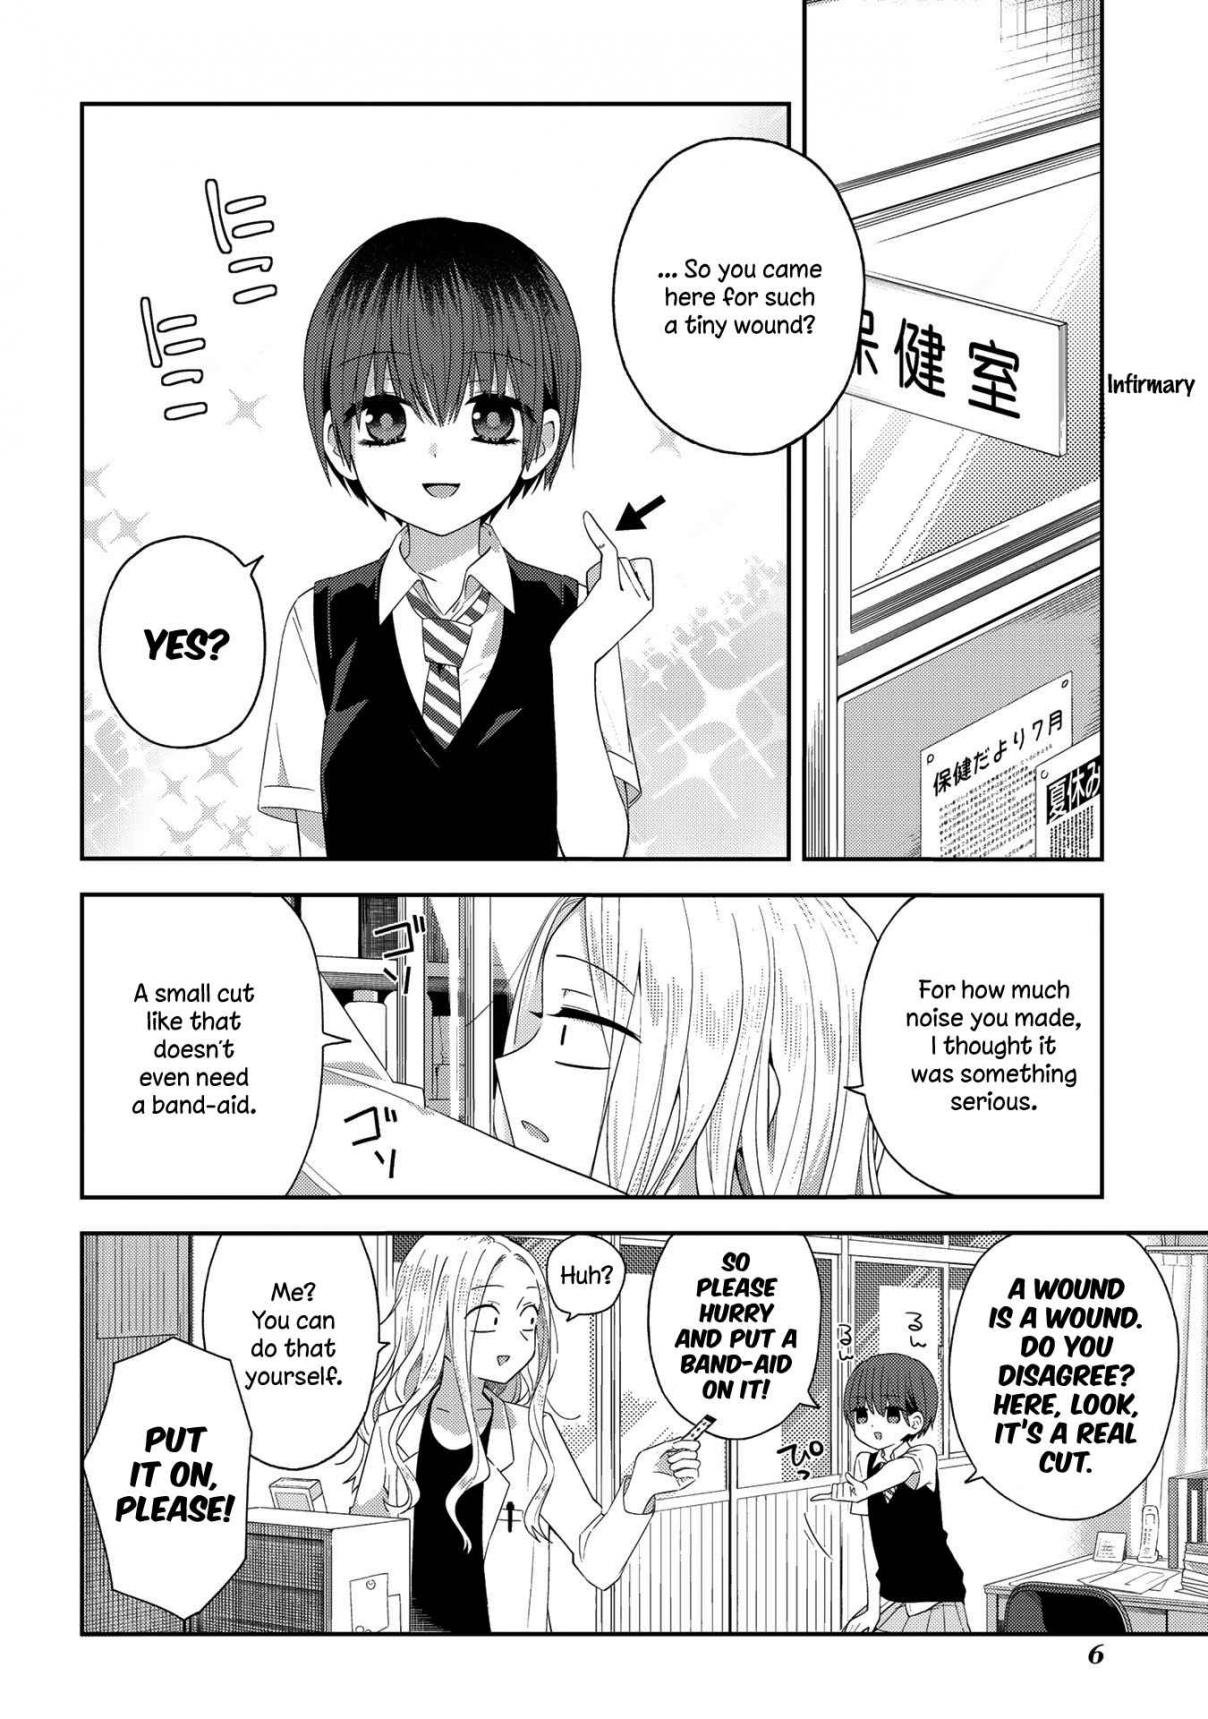 School Zone Vol. 2 Ch. 30 ... Well, this is an infirmary.